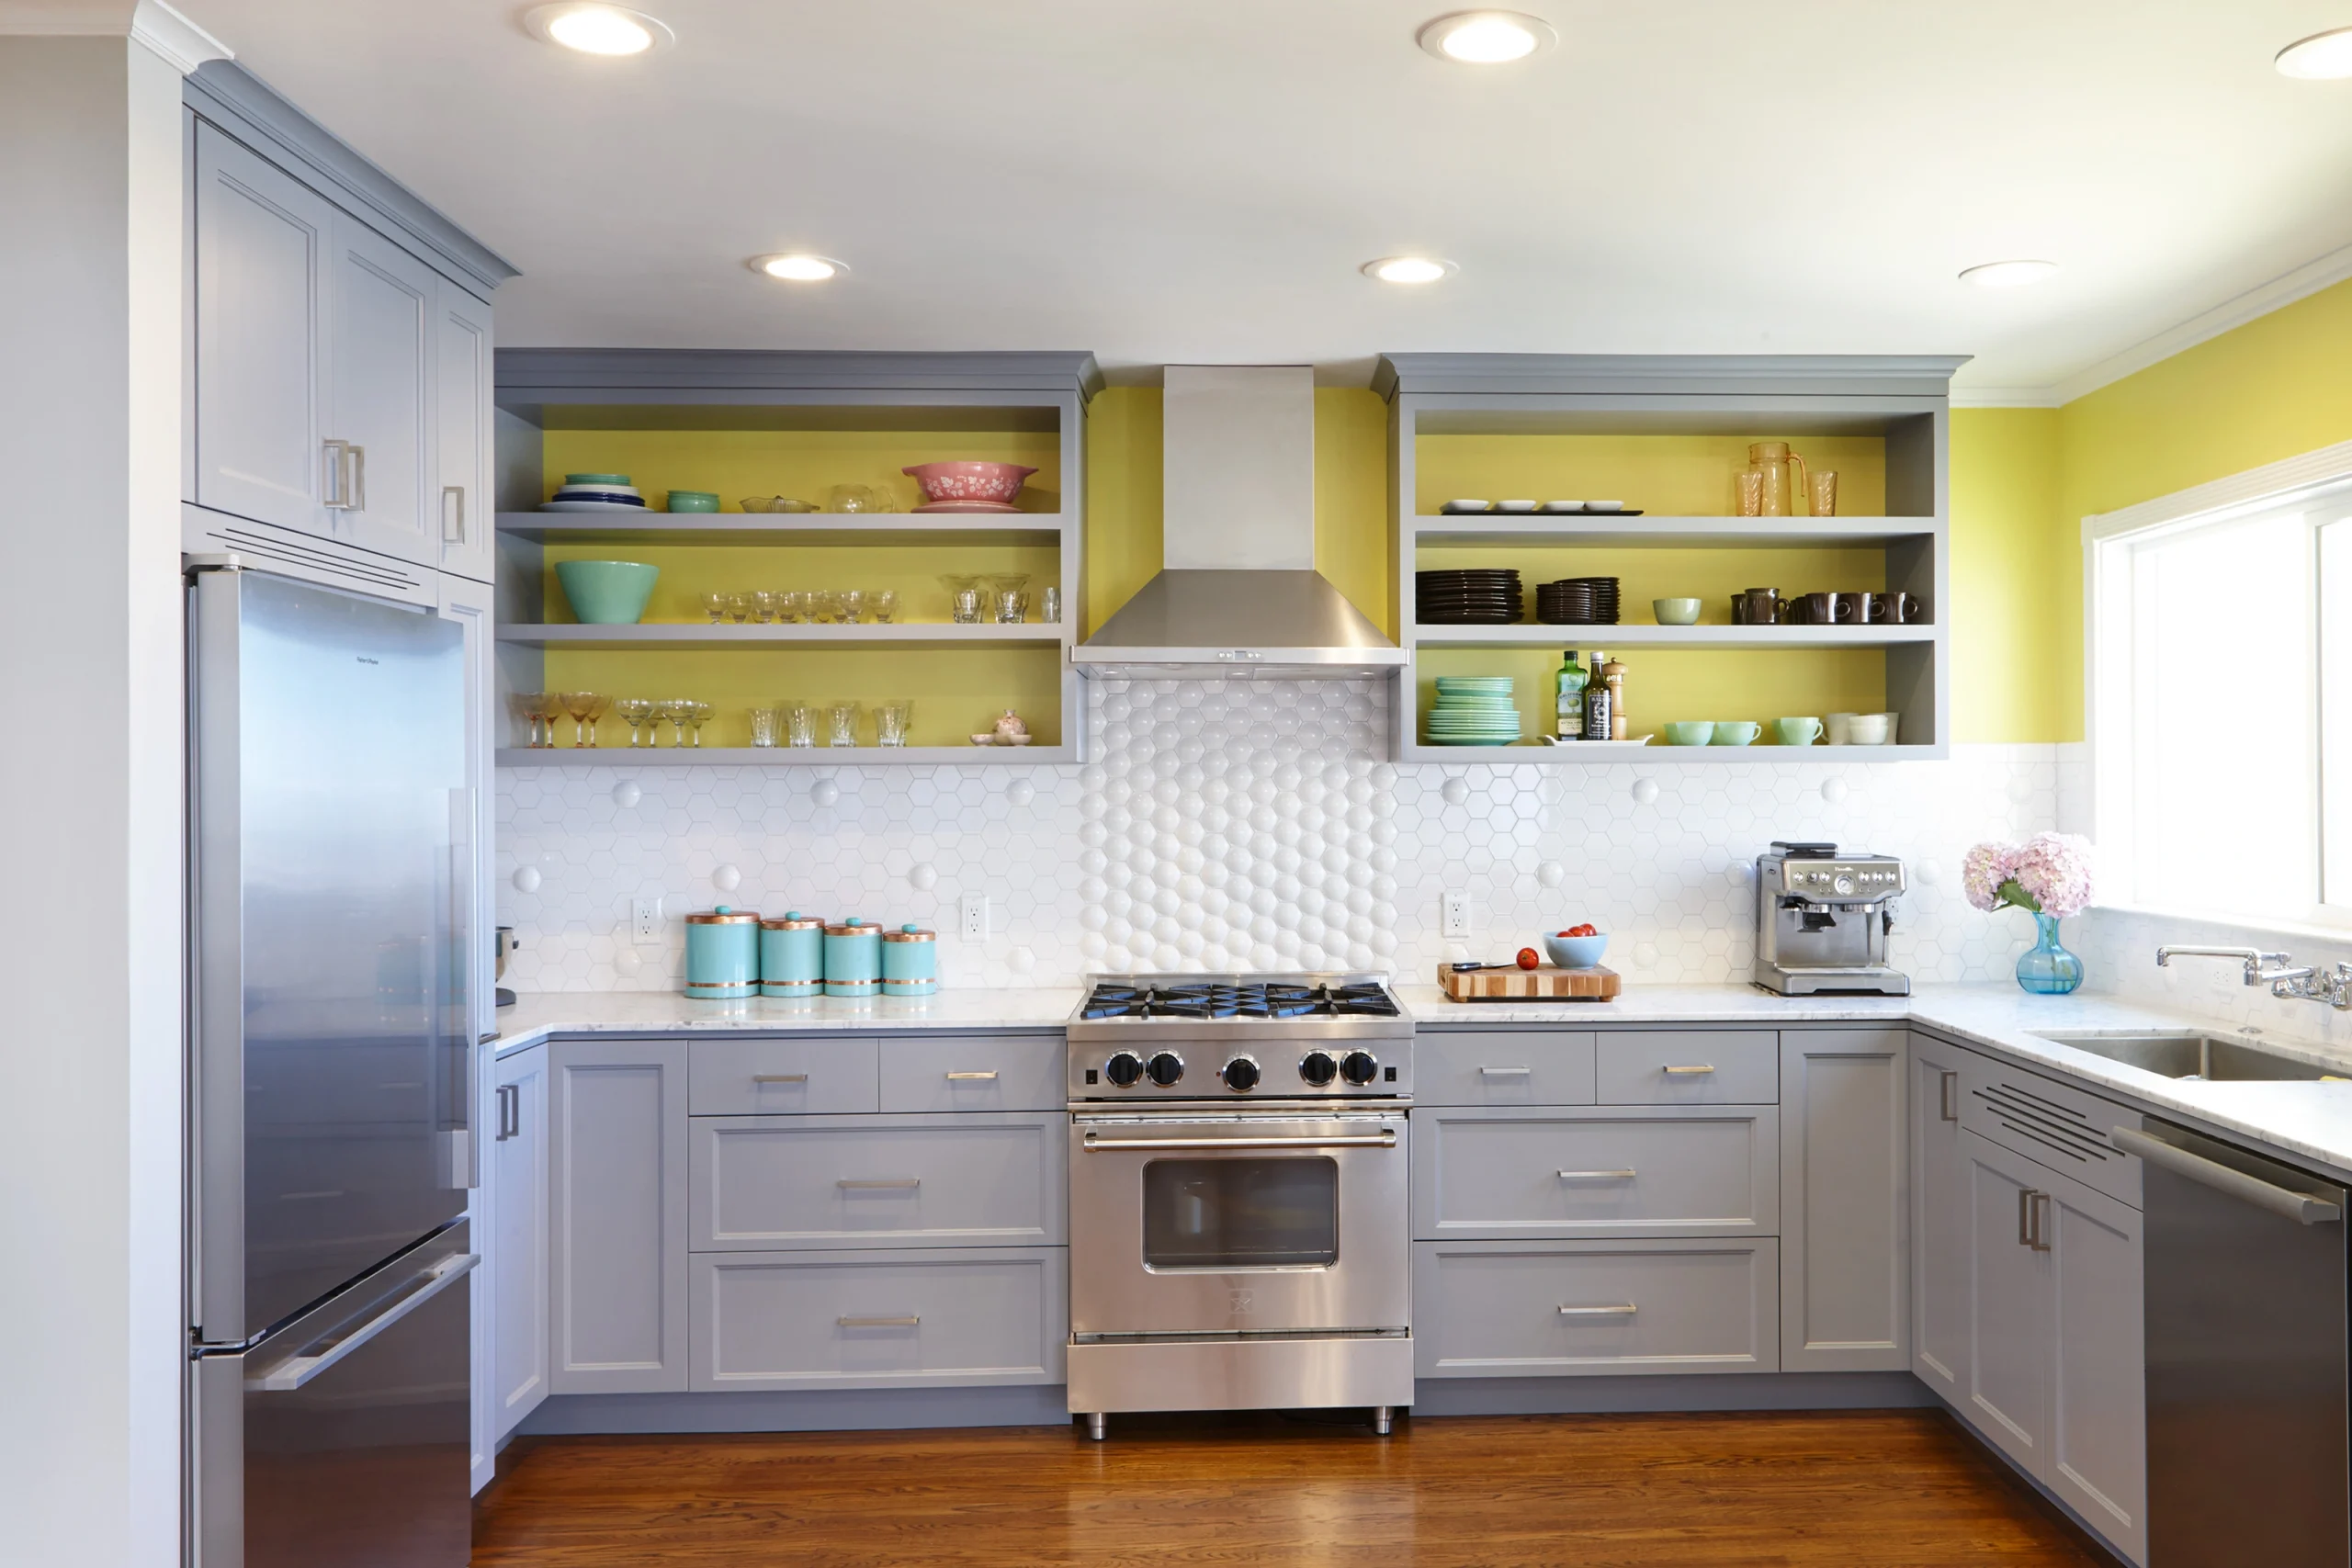 Best Paint Finish For Kitchen Walls And Cabinets